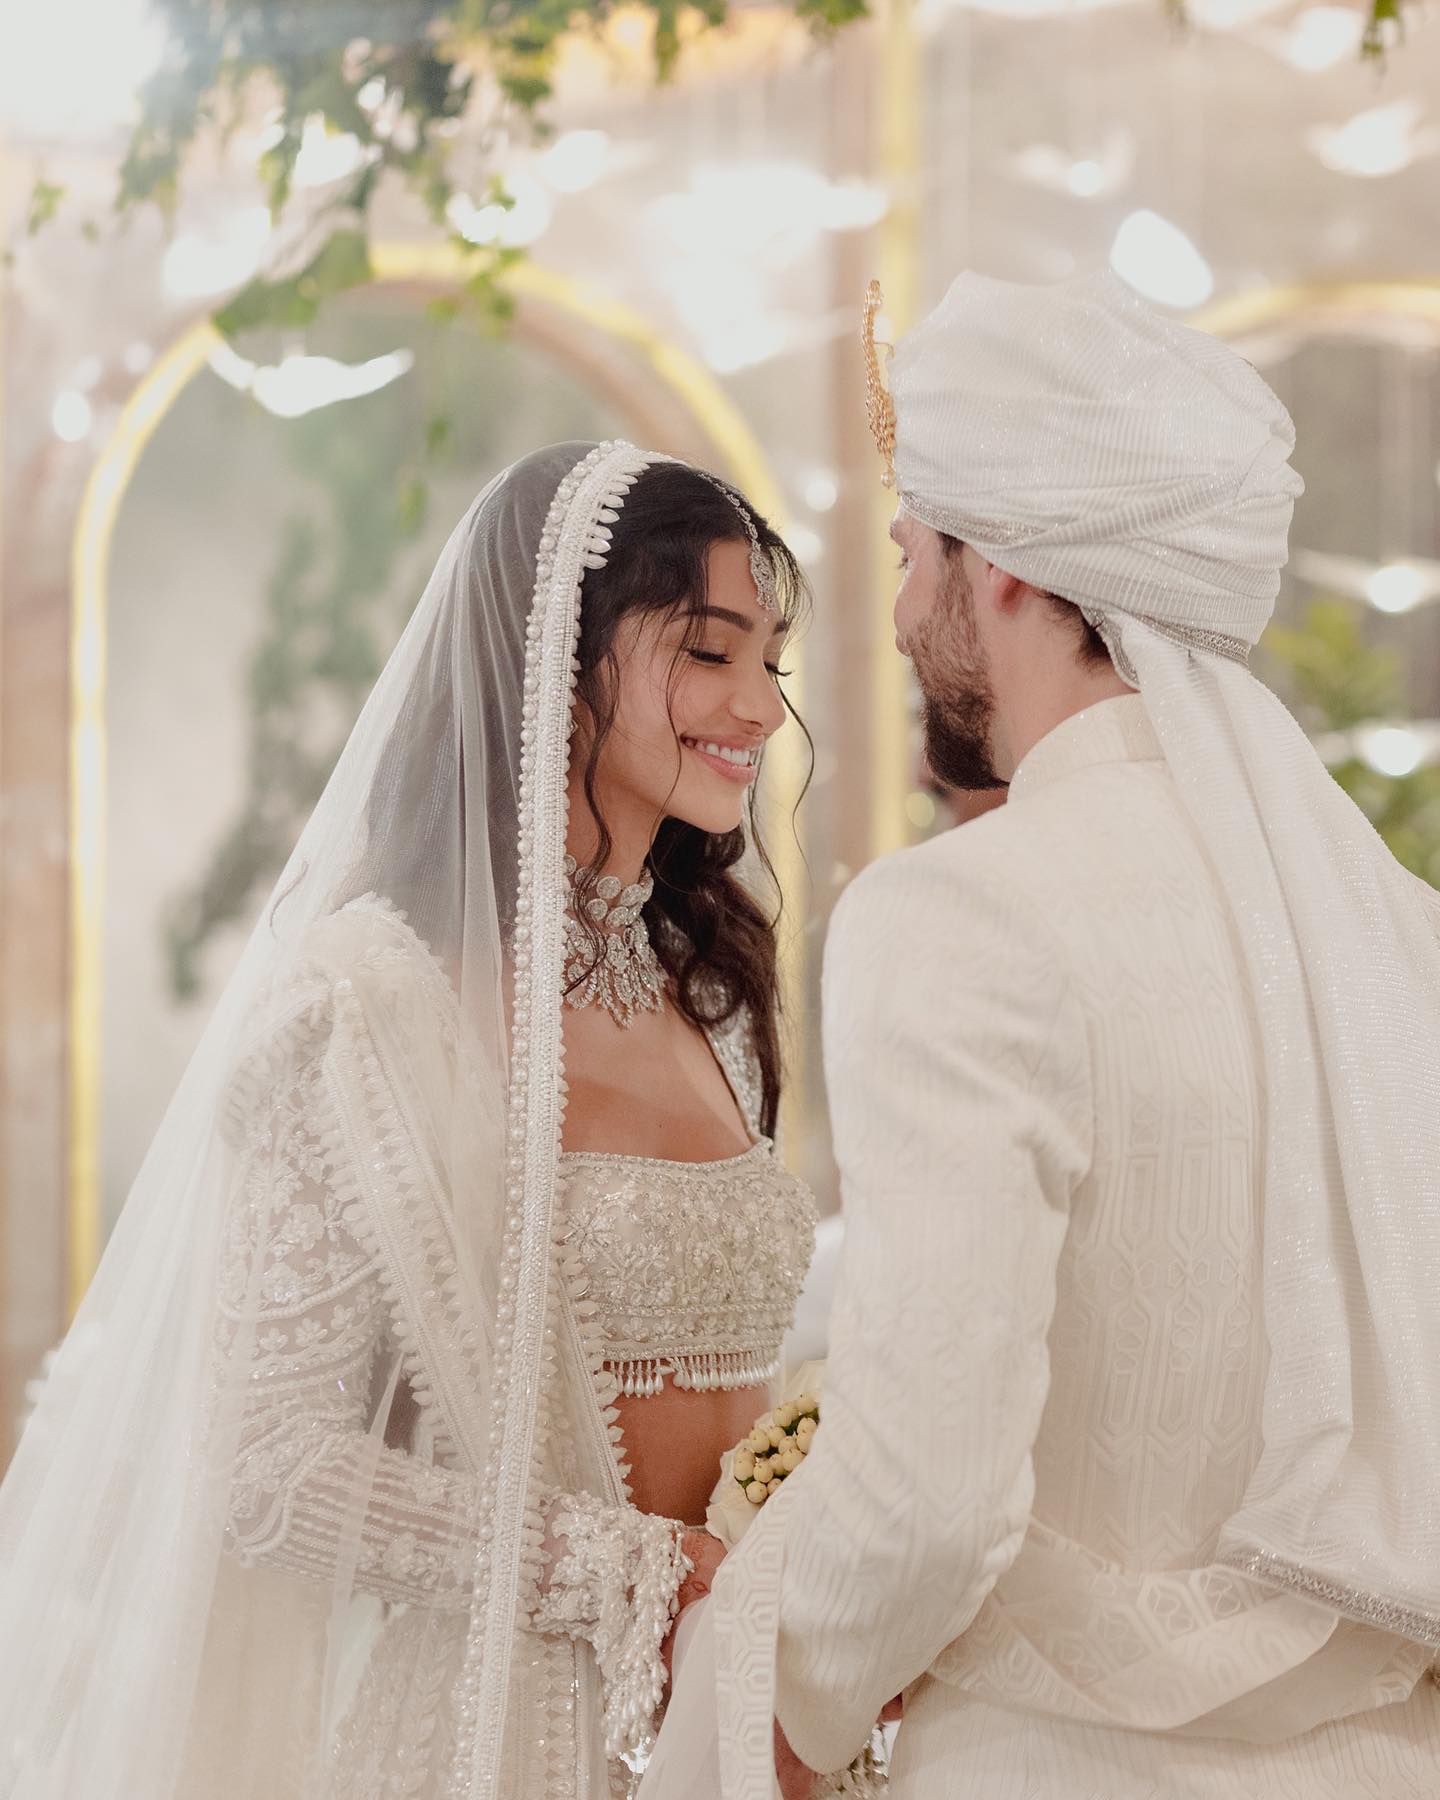 Alanna Panday & Ivor McCray Had An All-White Traditional Wedding